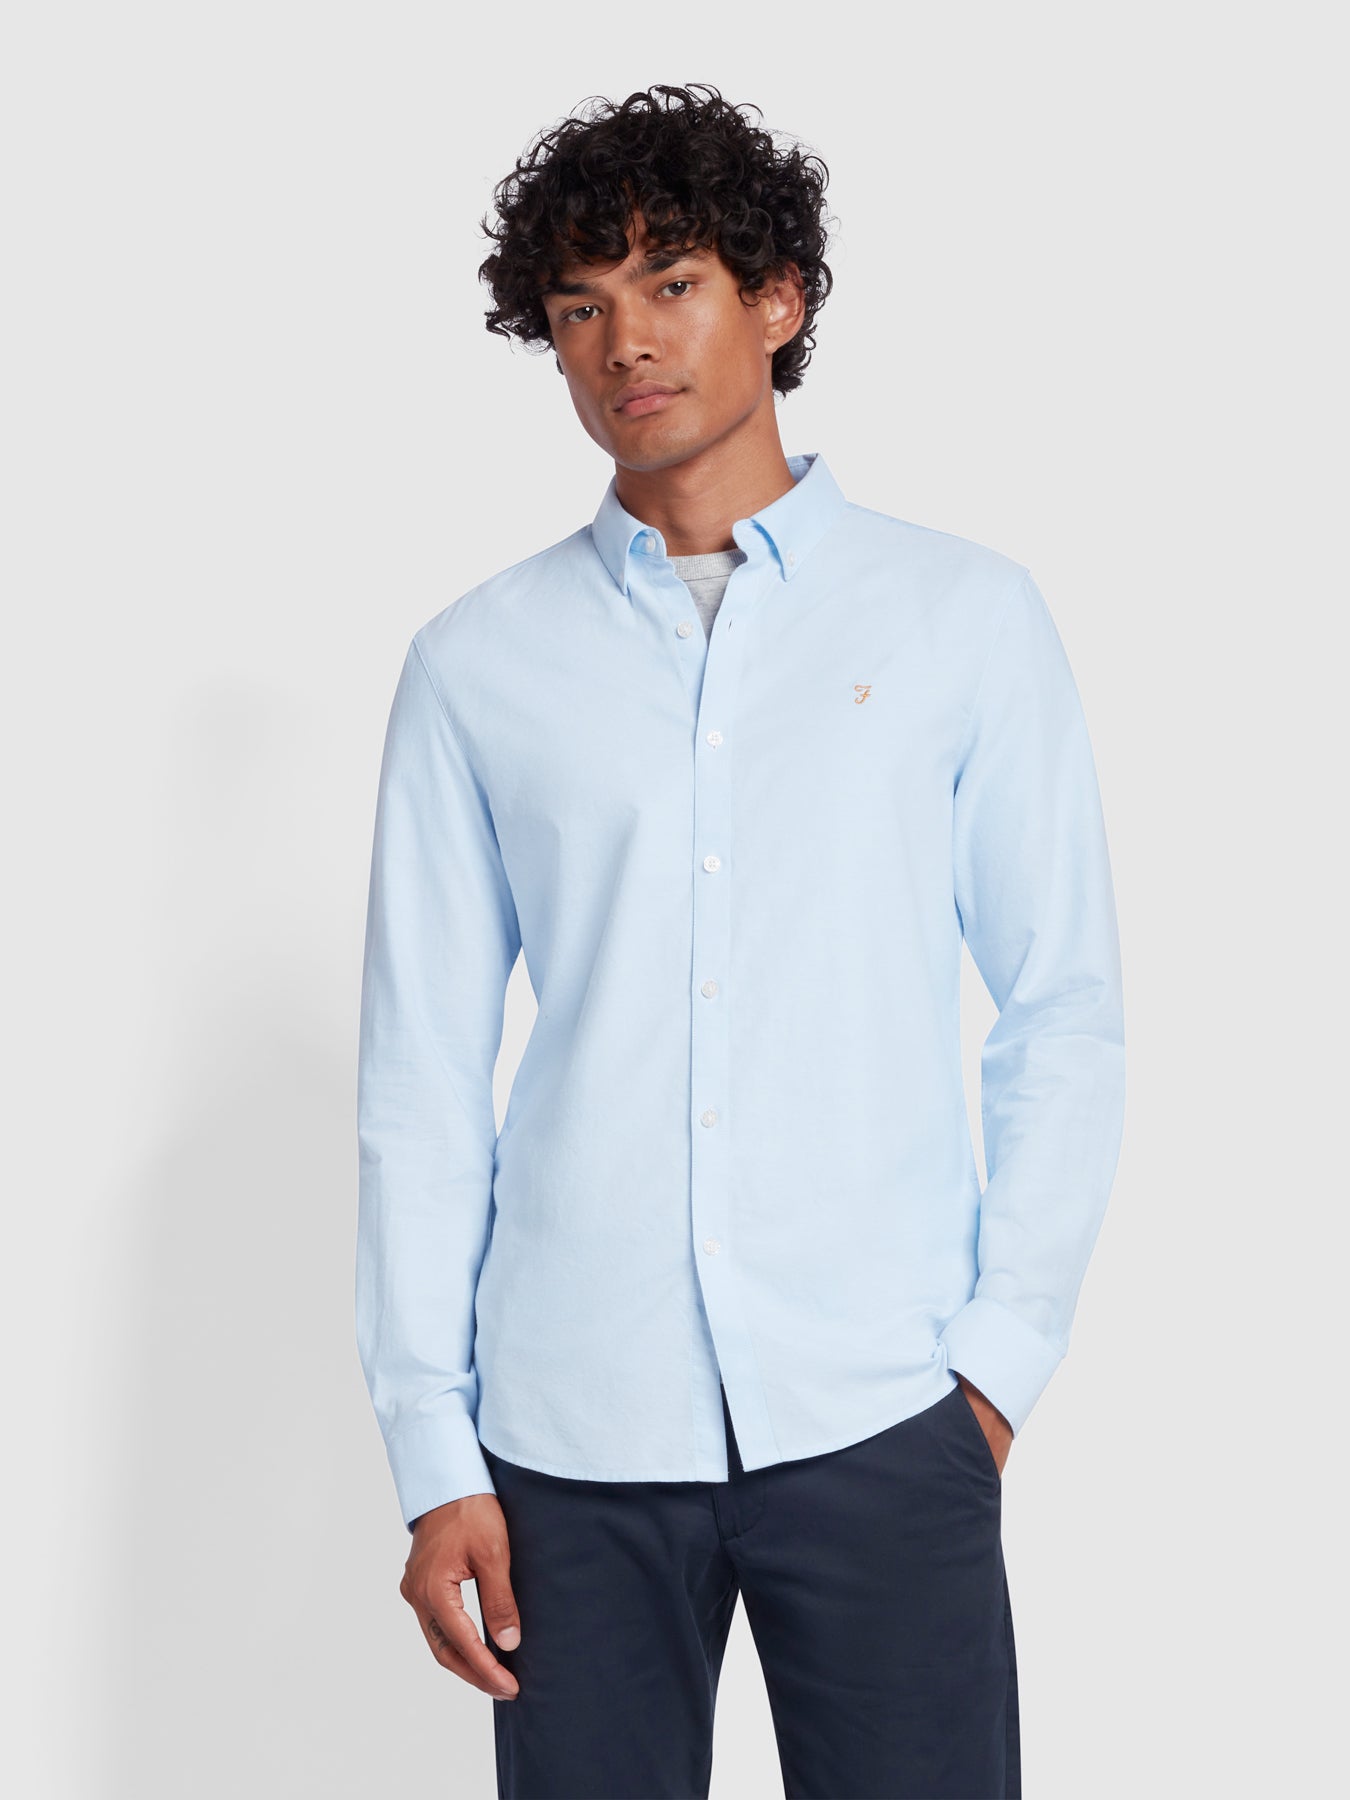 View Brewer Slim Fit Organic Cotton Oxford Shirt In Sky Blue information